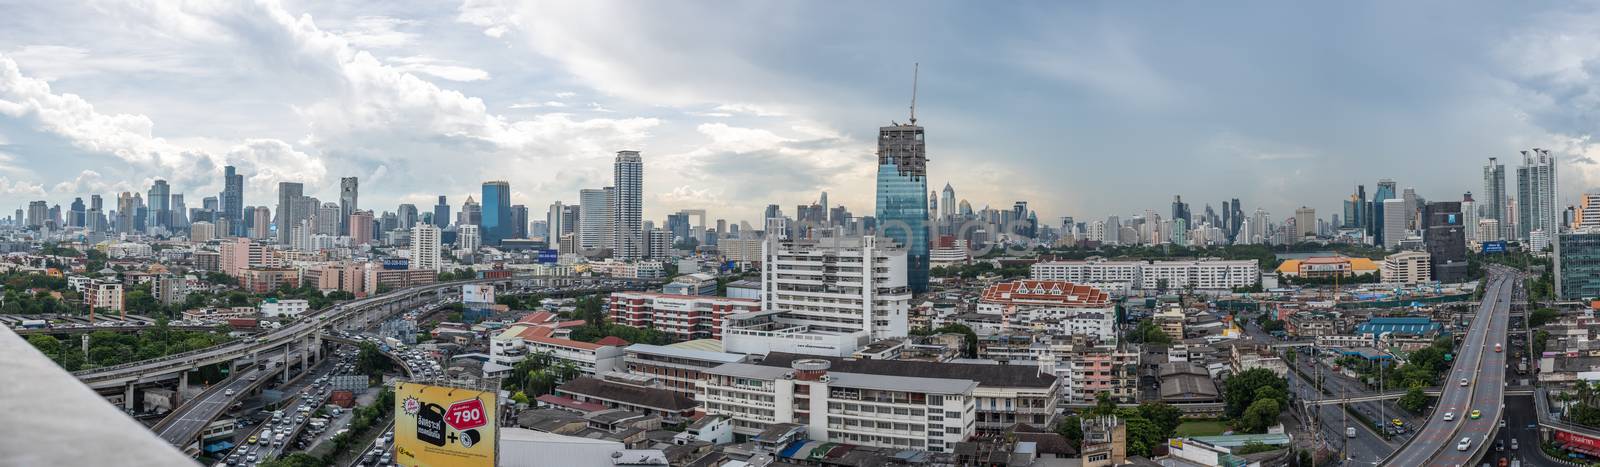 Bangkok, Thailand - May 26, 2018 : Panorama cityscape and building of city in storm clouds sky from skyscraper of Bangkok. Bangkok is the capital and the most populous city of Thailand.